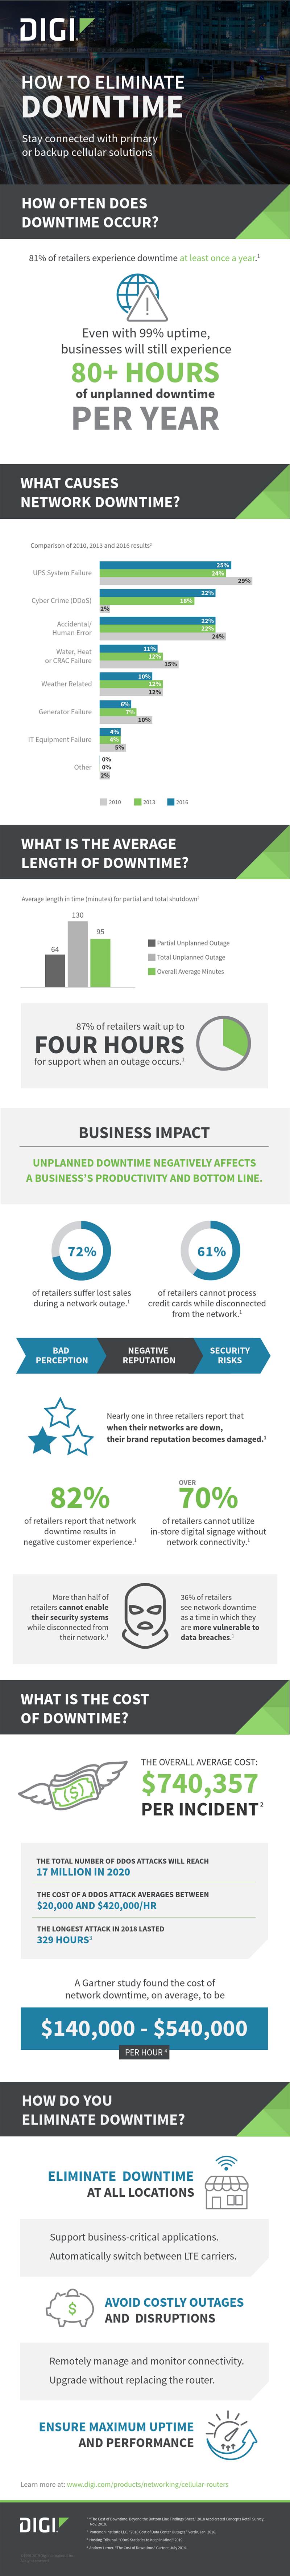 How To Eliminate Downtime Infographic